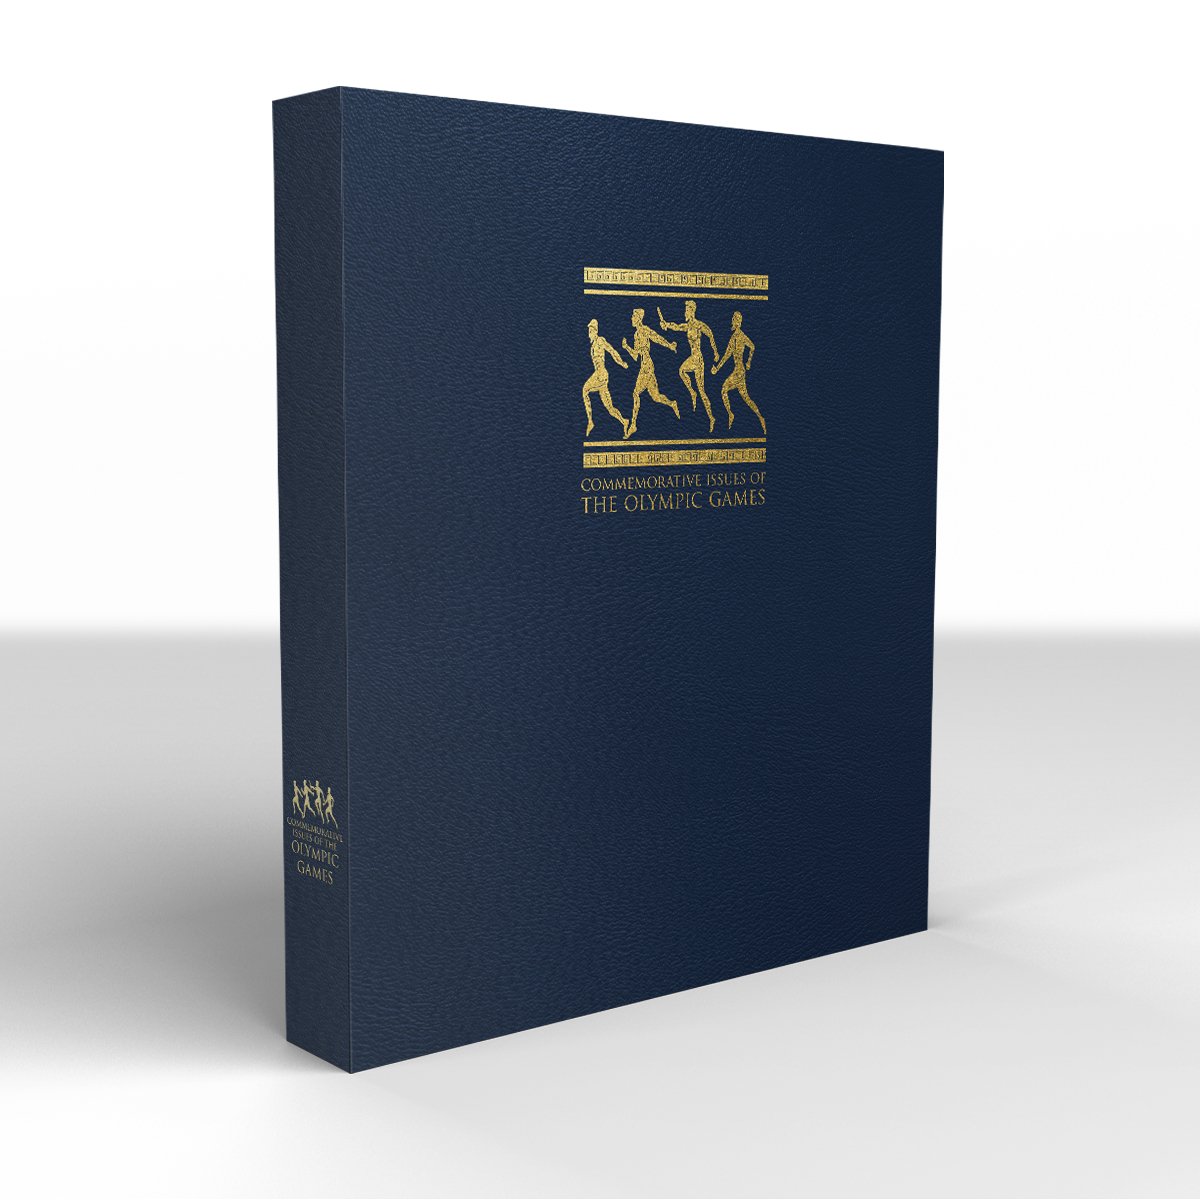 Bewaaralbum "Commemorative issues of the Olympic Games" - Edel Collecties